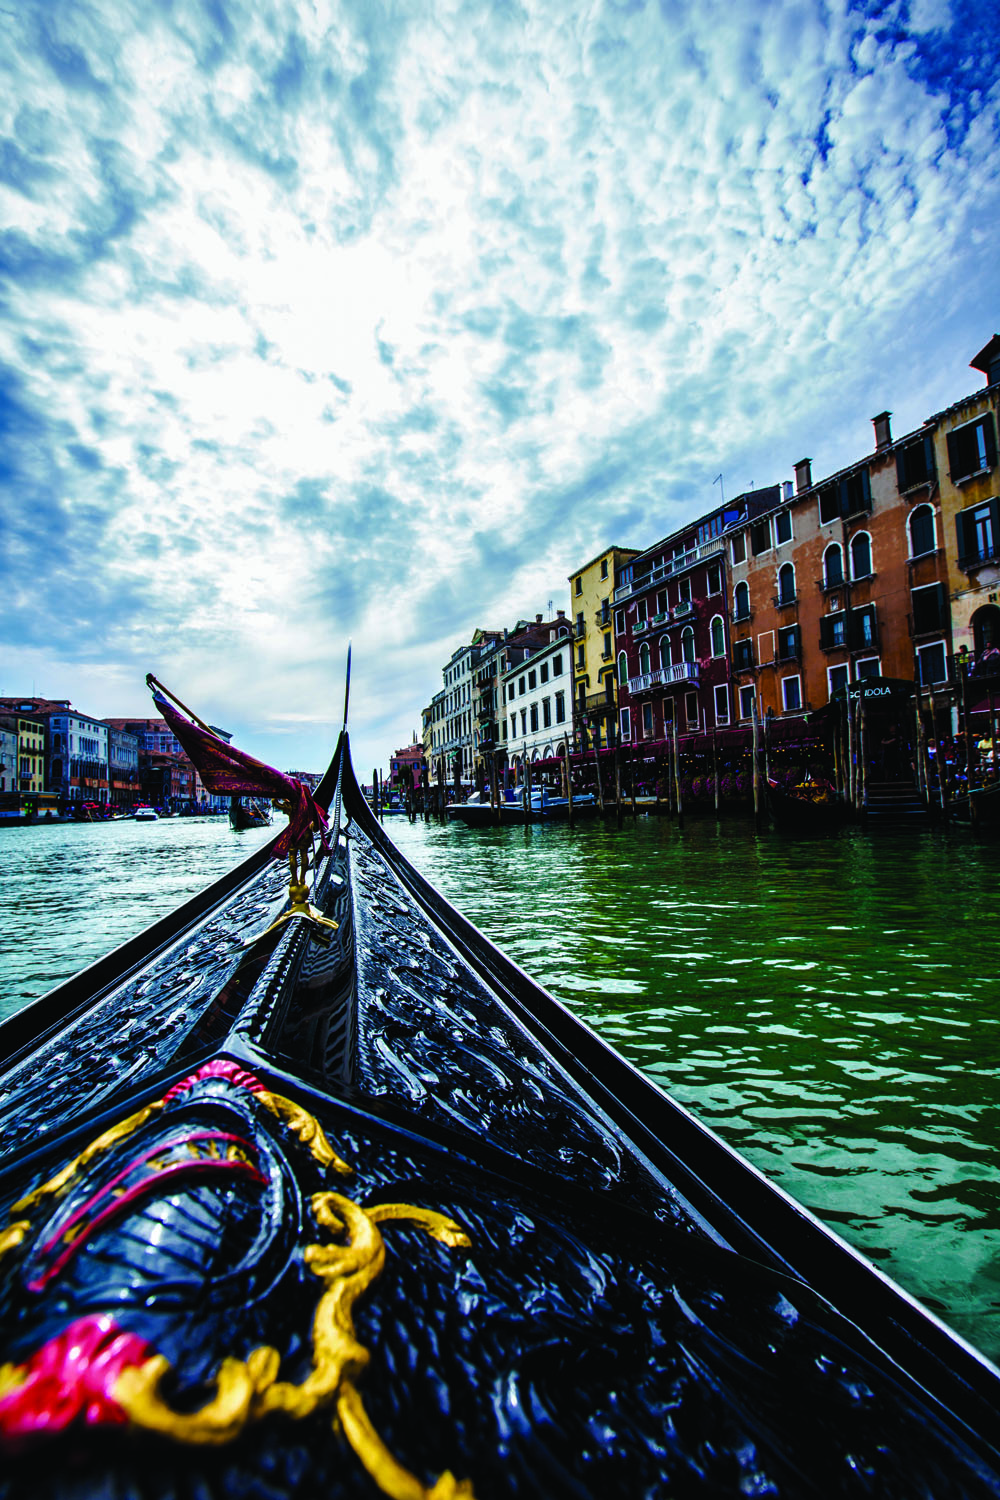 *View up from a Gondola on the Grand Canal